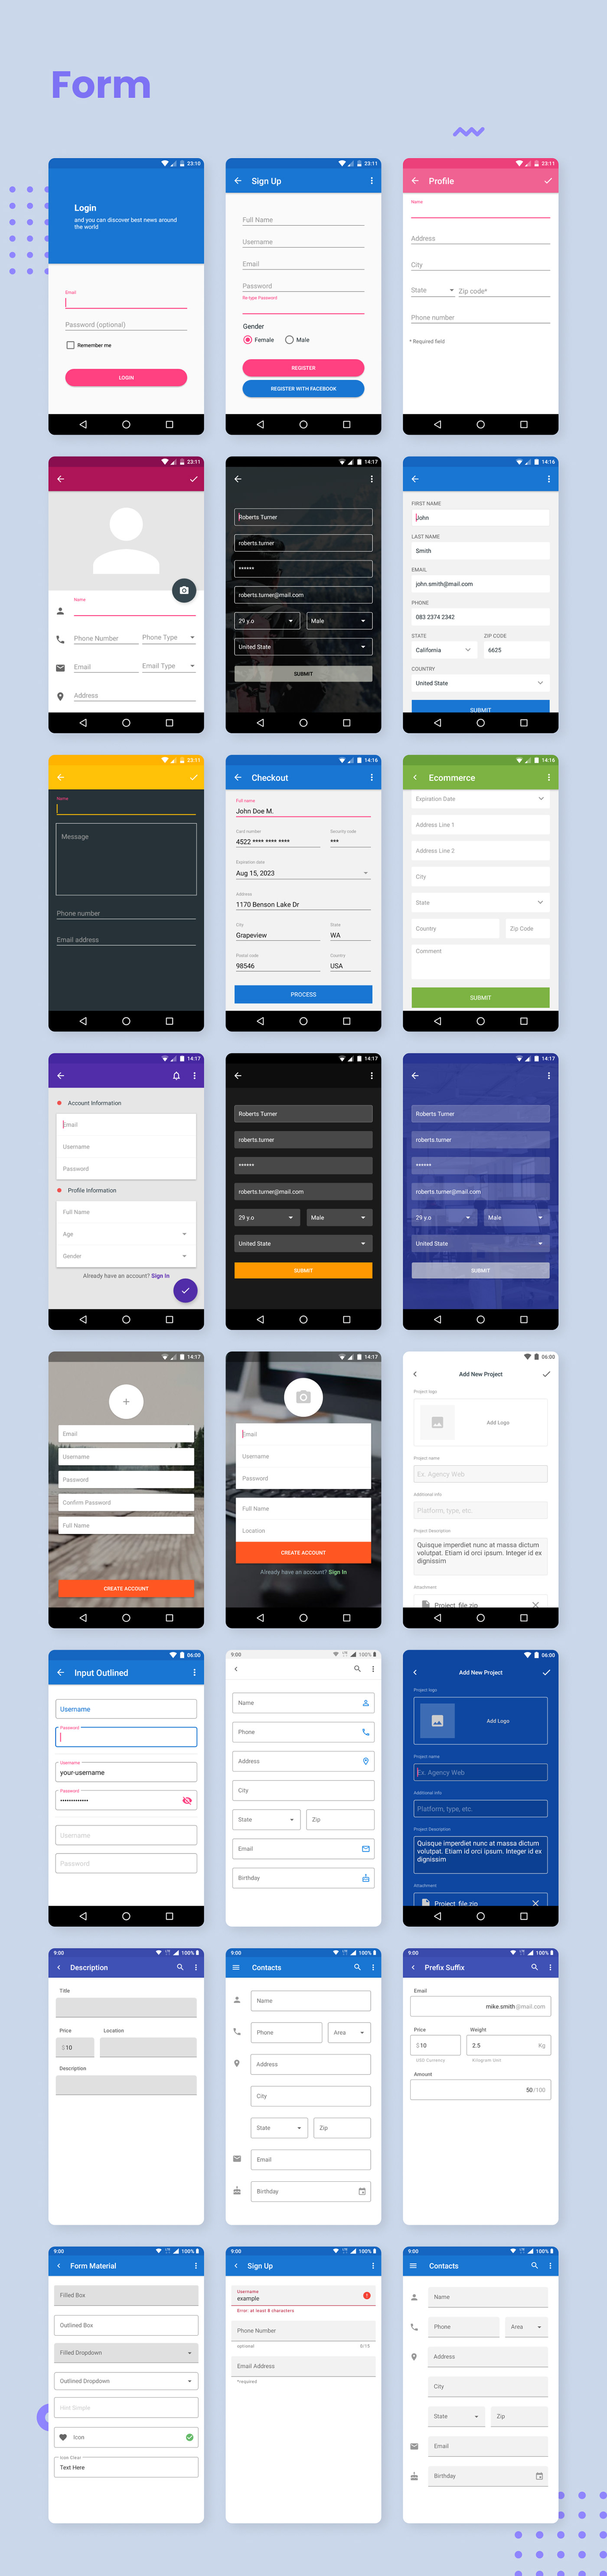 MaterialX - Interface do Android Material Design 2.8 - 22